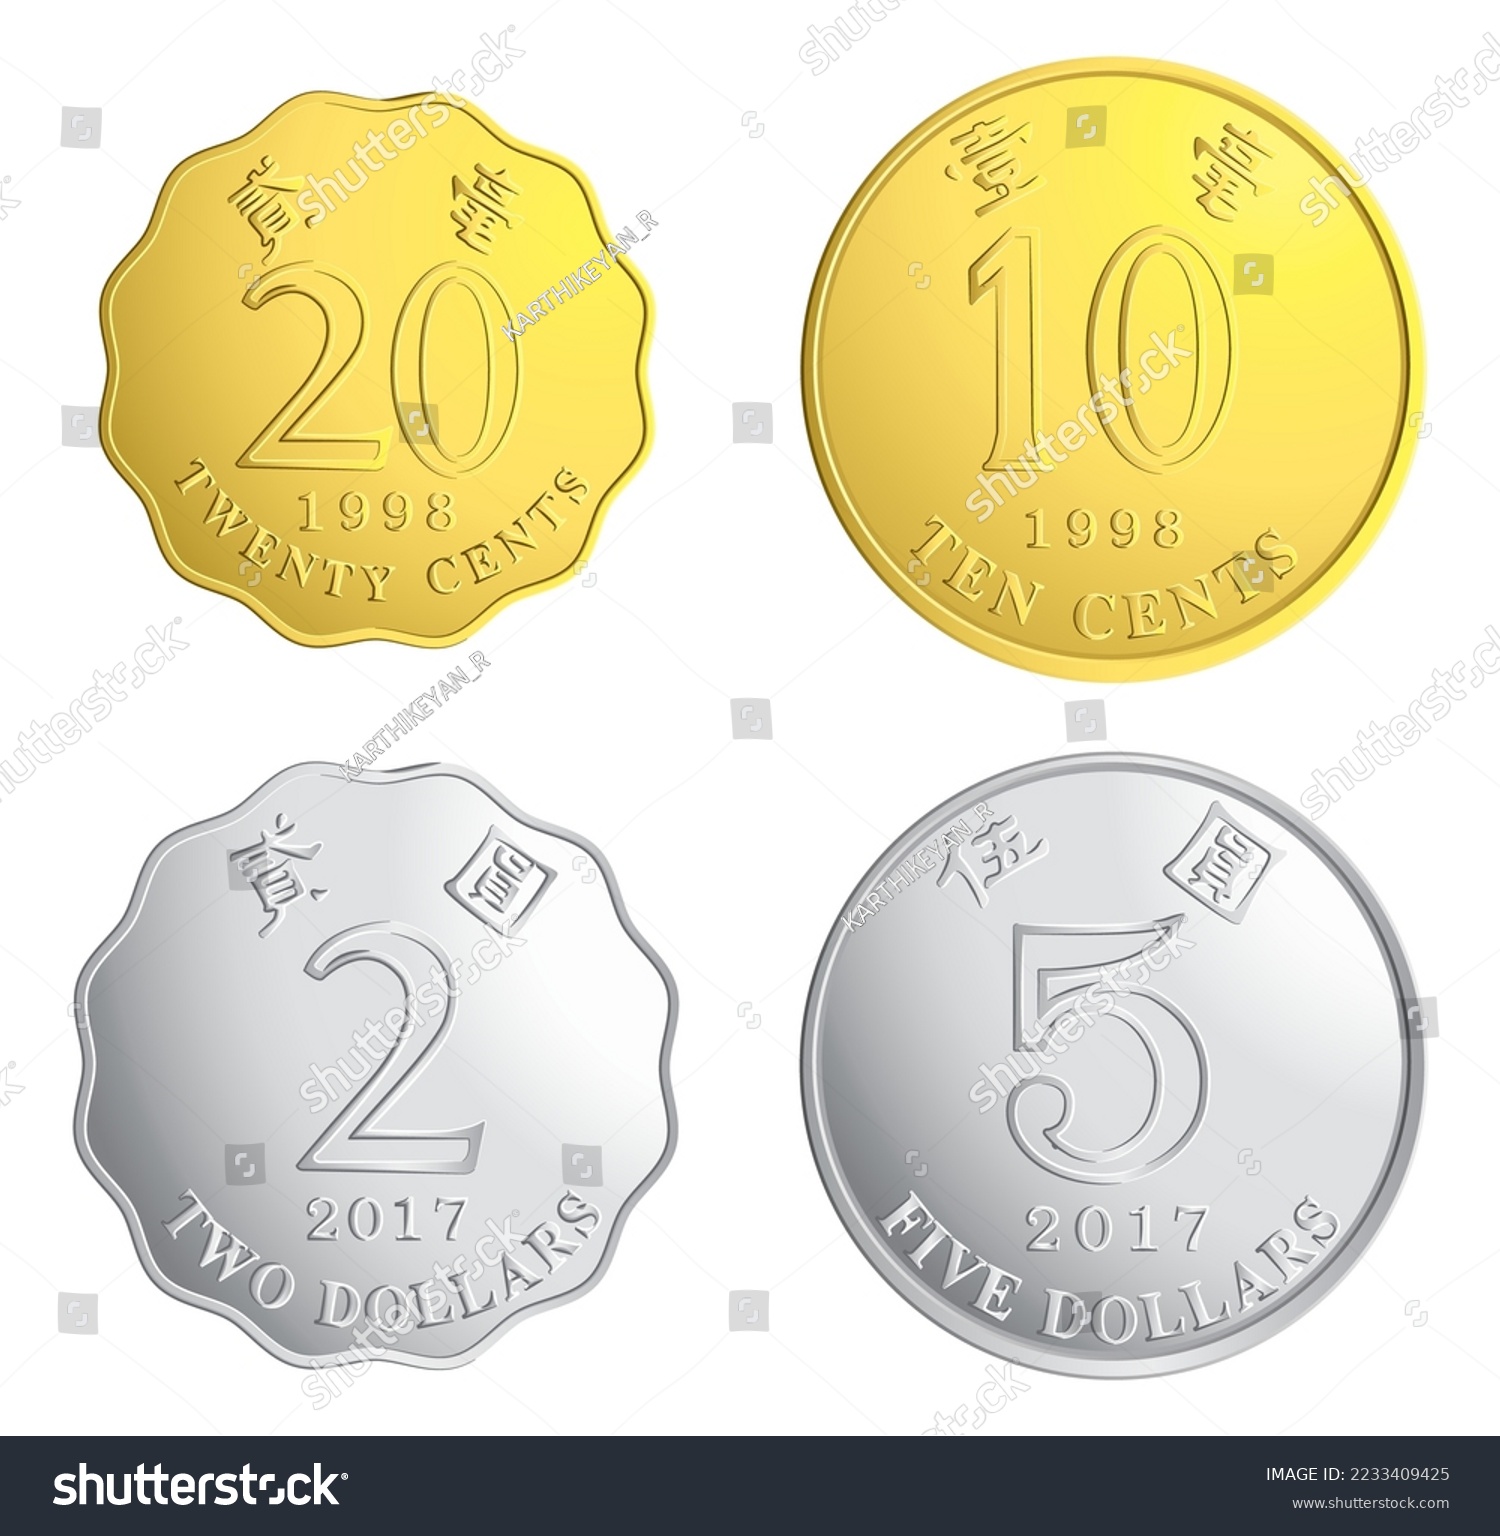 SVG of Reverse of Hong Kong Coins 20 cents, 10 cents, 2 dollars, 5 dollars isolated on white background in vector illustration  svg